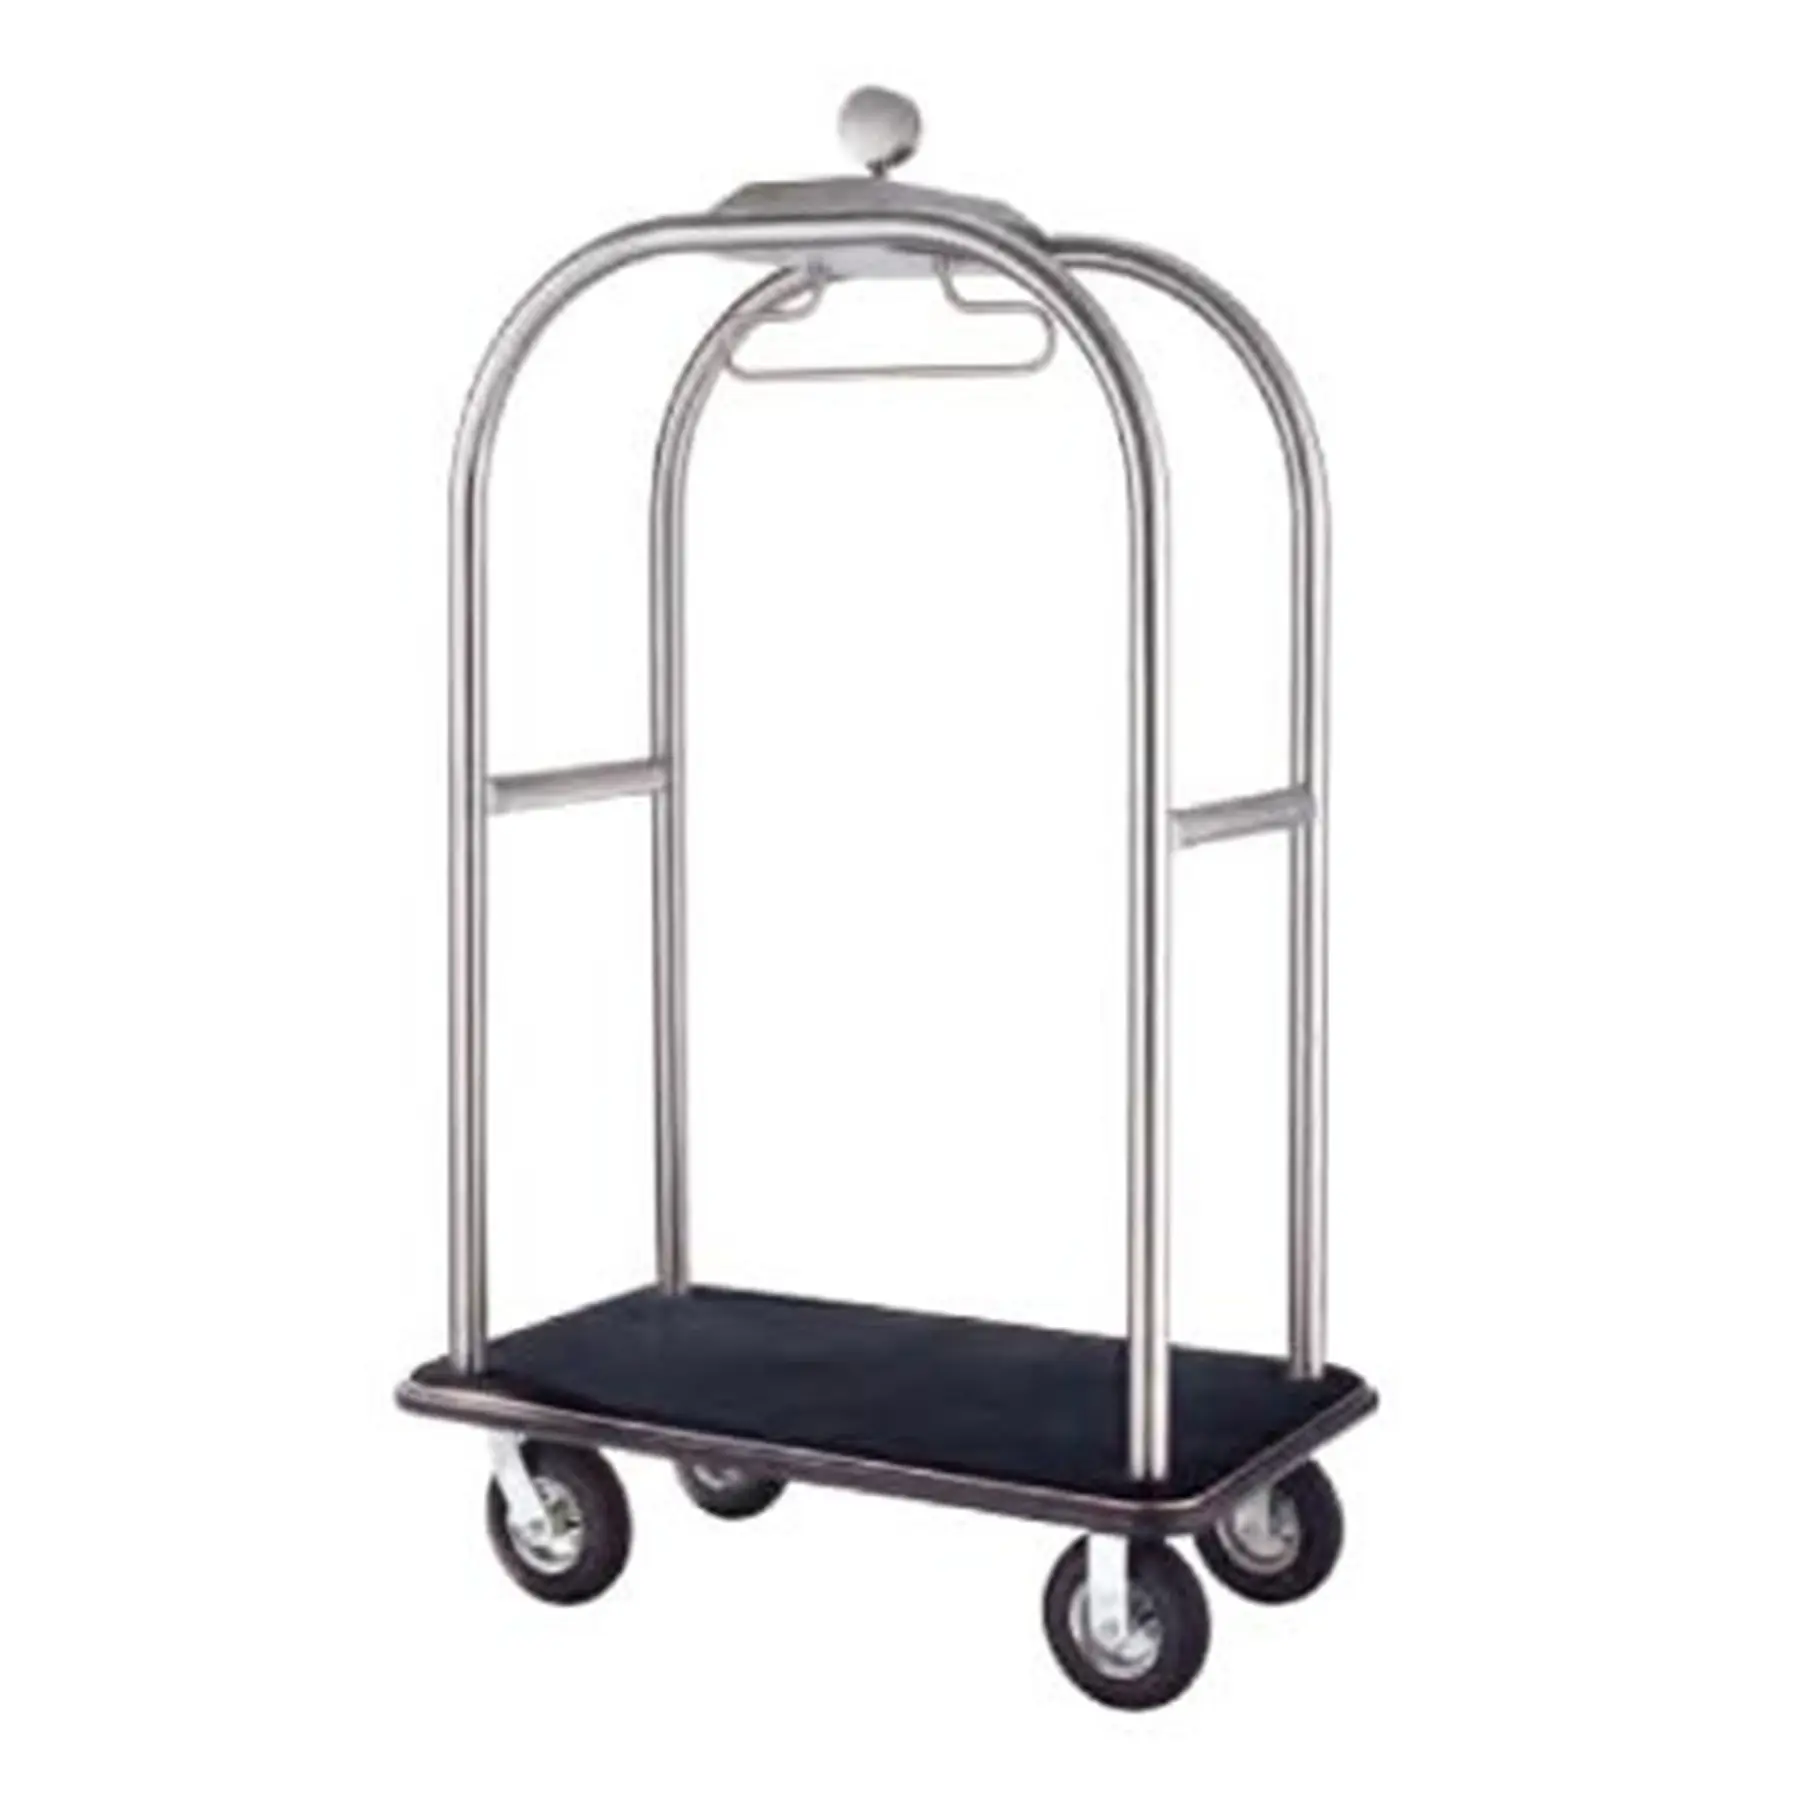 High quality Stainless Steel 4 Wheel Hotel Durable Luggage Cart